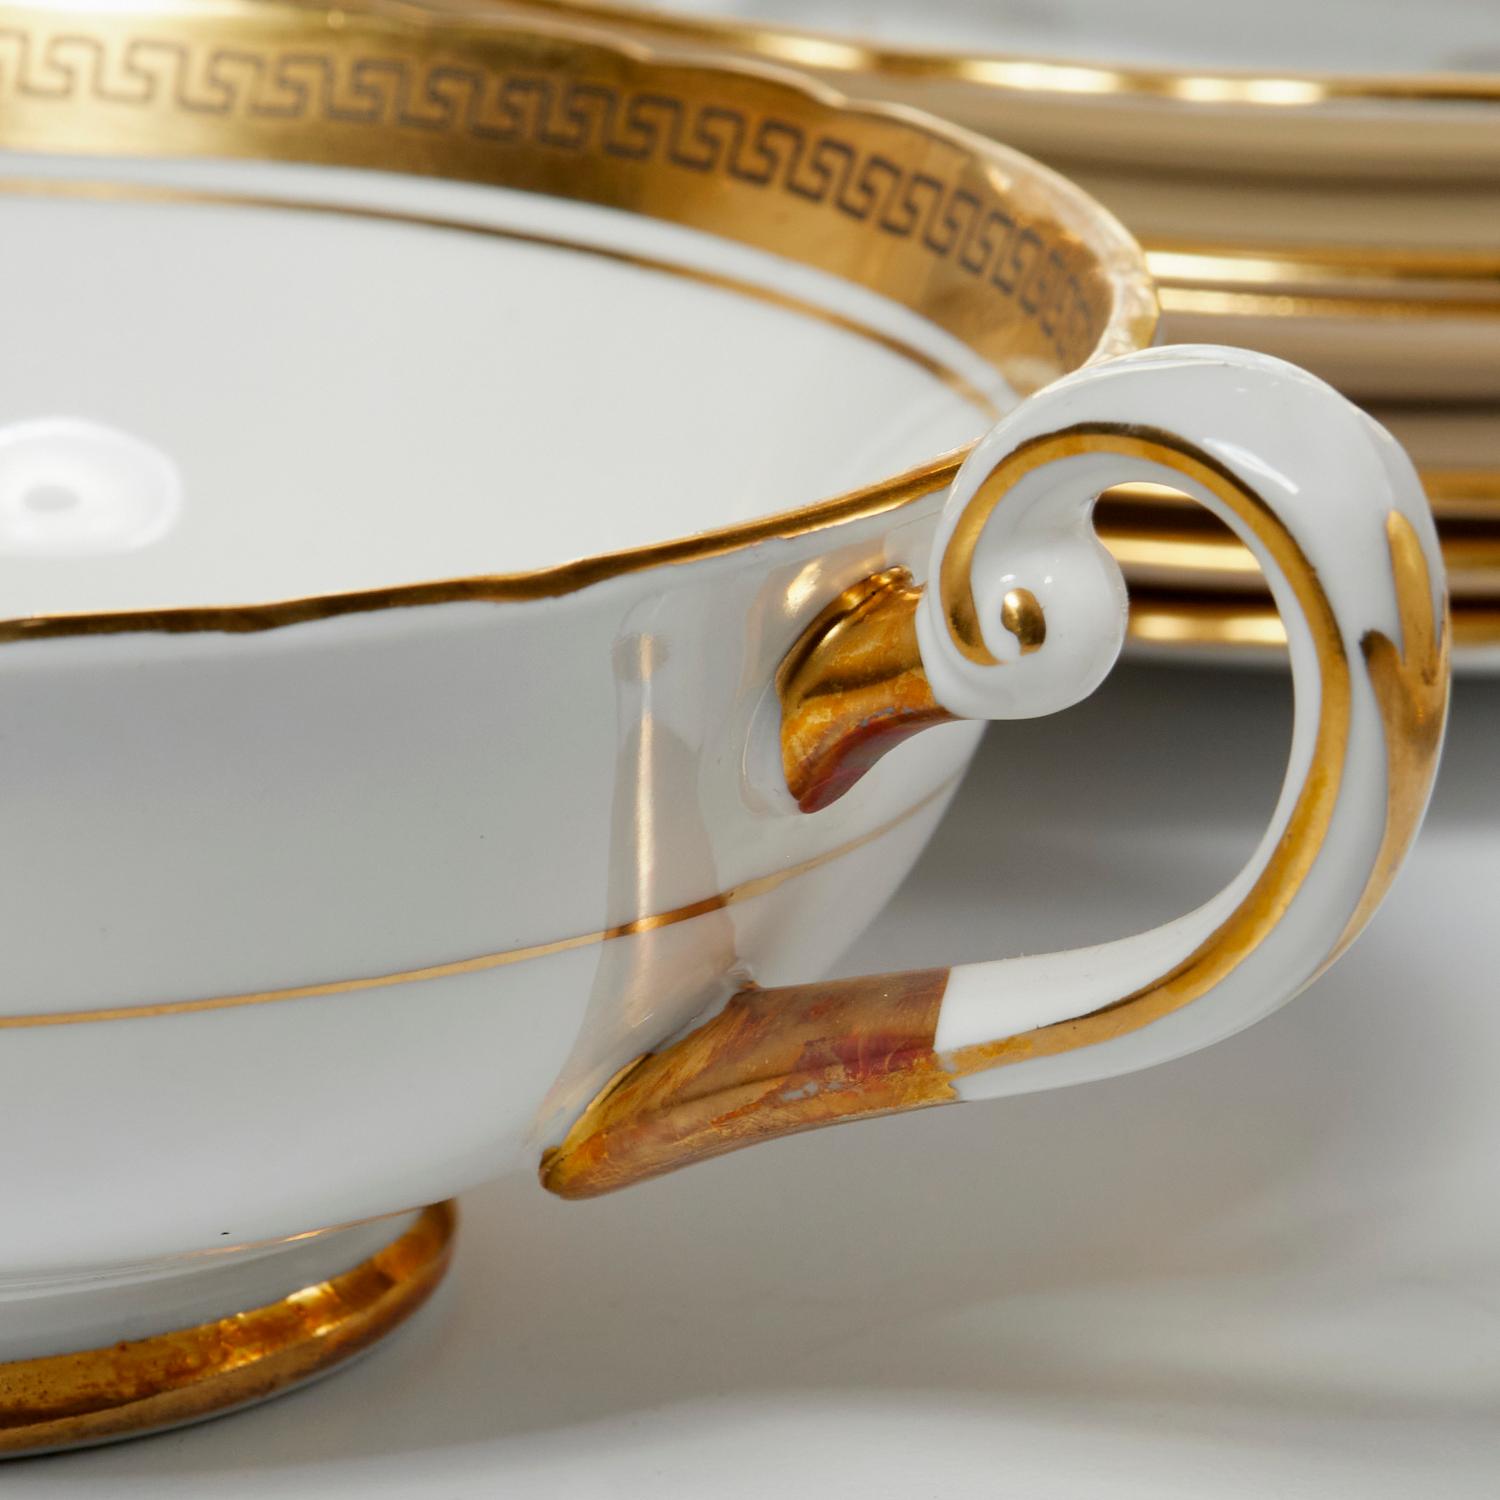 Glazed Mid 20th C. English Porcelain Dinner Service (52 Pieces) for Harrods of London For Sale